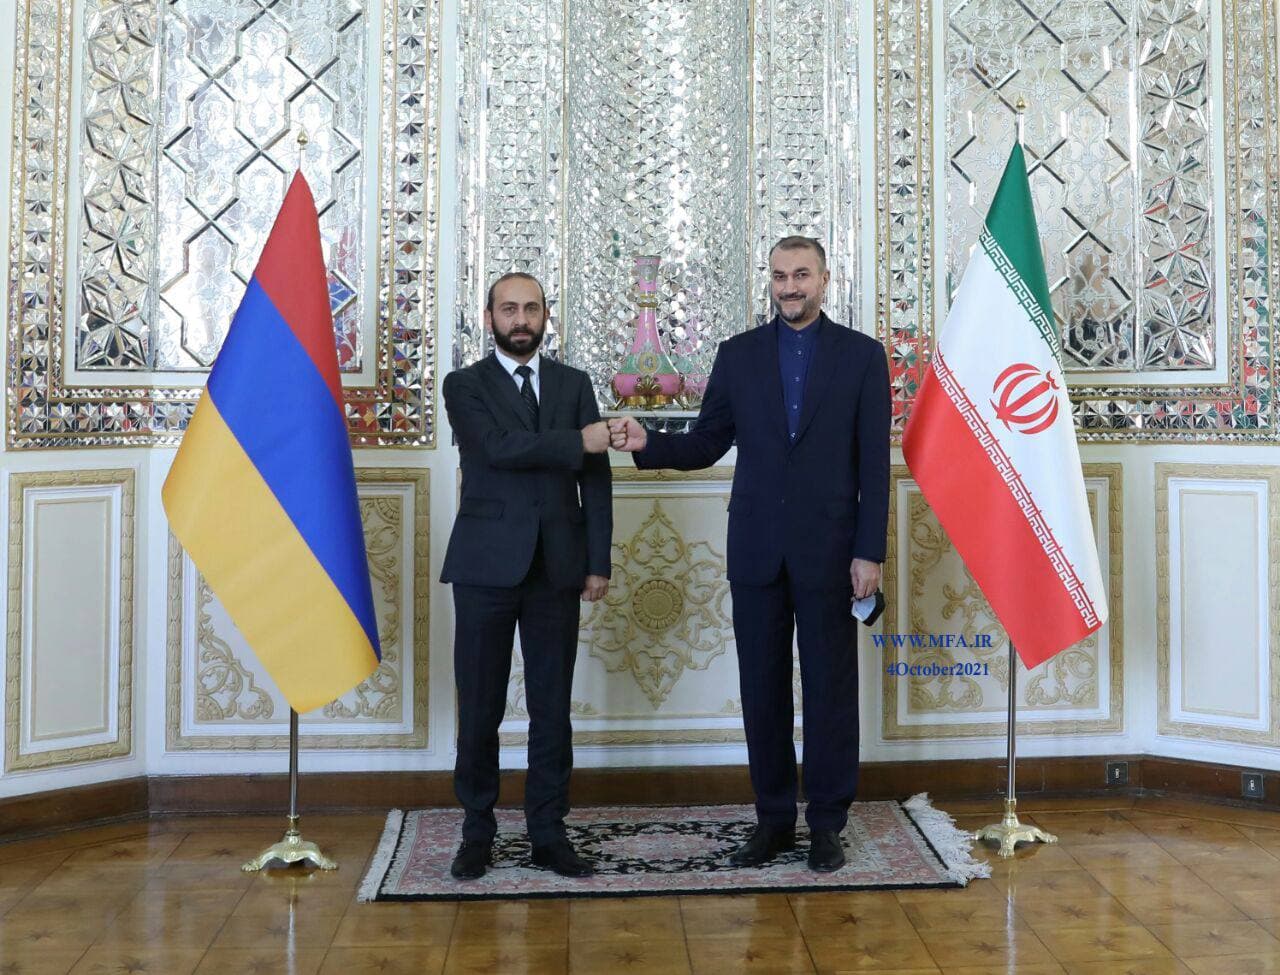 Armenian Foreign Minister Ararat Mirzoyan meets with his Iranian counterpart Hossein Amirabdollahian during his official visit to Iran (Photo: Iranian Ministry of Foreign Affairs, Oct. 4, 2021)